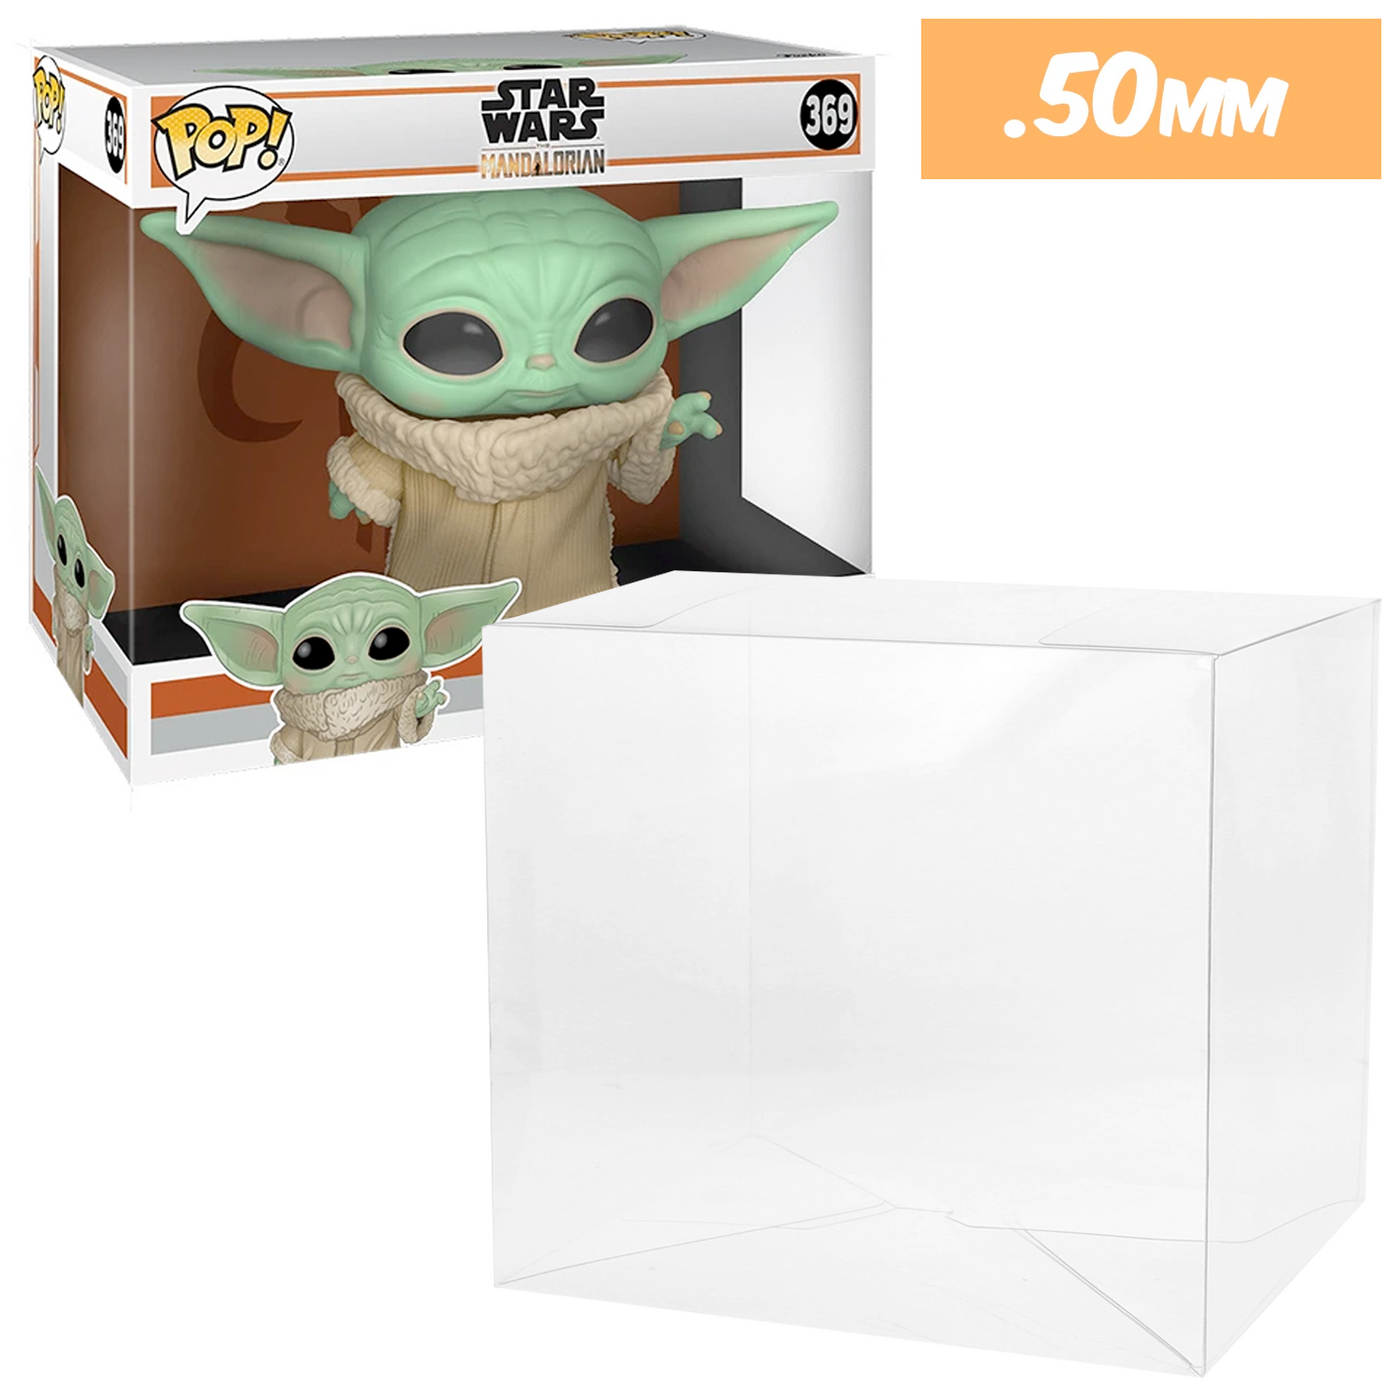 star wars the child wide 10 inch best funko pop protectors thick strong uv scratch flat top stack vinyl display geek plastic shield vaulted eco armor fits collect protect display case kollector protector